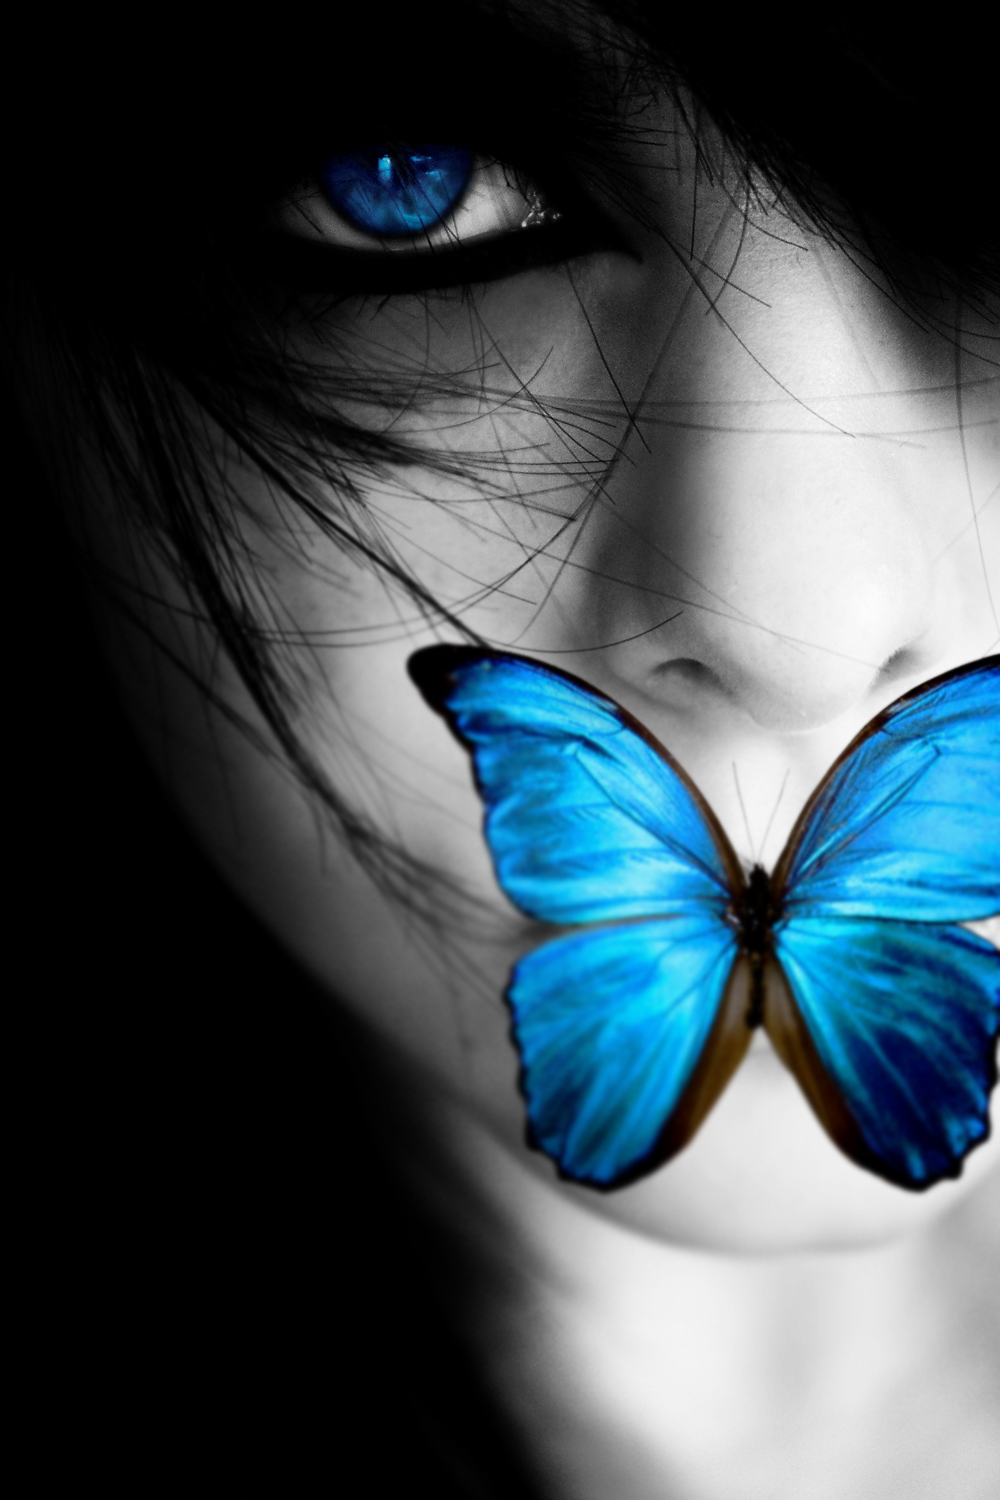 Butterfly_Kisses_by_rosanna_lacey.jpg